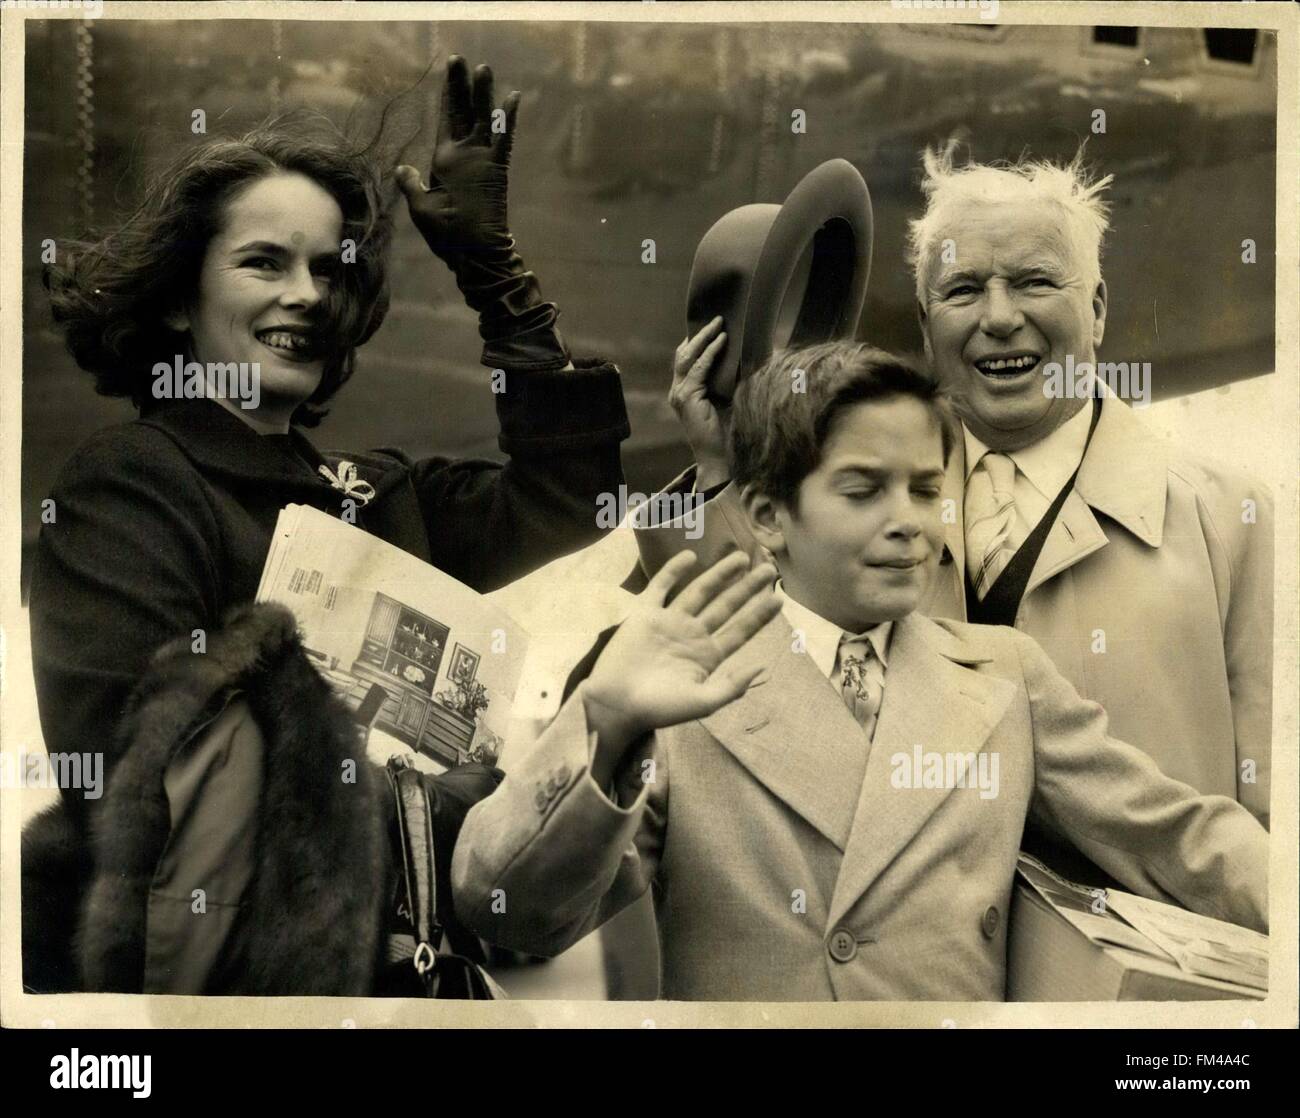 1956 - Charlie Chaplin and son arrive for film premiere: Charlie Chaplin with his wife Ocna and their son Michael aged 10 arrived at London Airport this afternoon, They are here for the world premiere on Thursday of their new film ''A King in New York''-in which Michael appears. Photo shows Charlie Chaplin and his wife Ocna with Michael at London Airport this afternoon. © Keystone Pictures USA/ZUMAPRESS.com/Alamy Live News Stock Photo